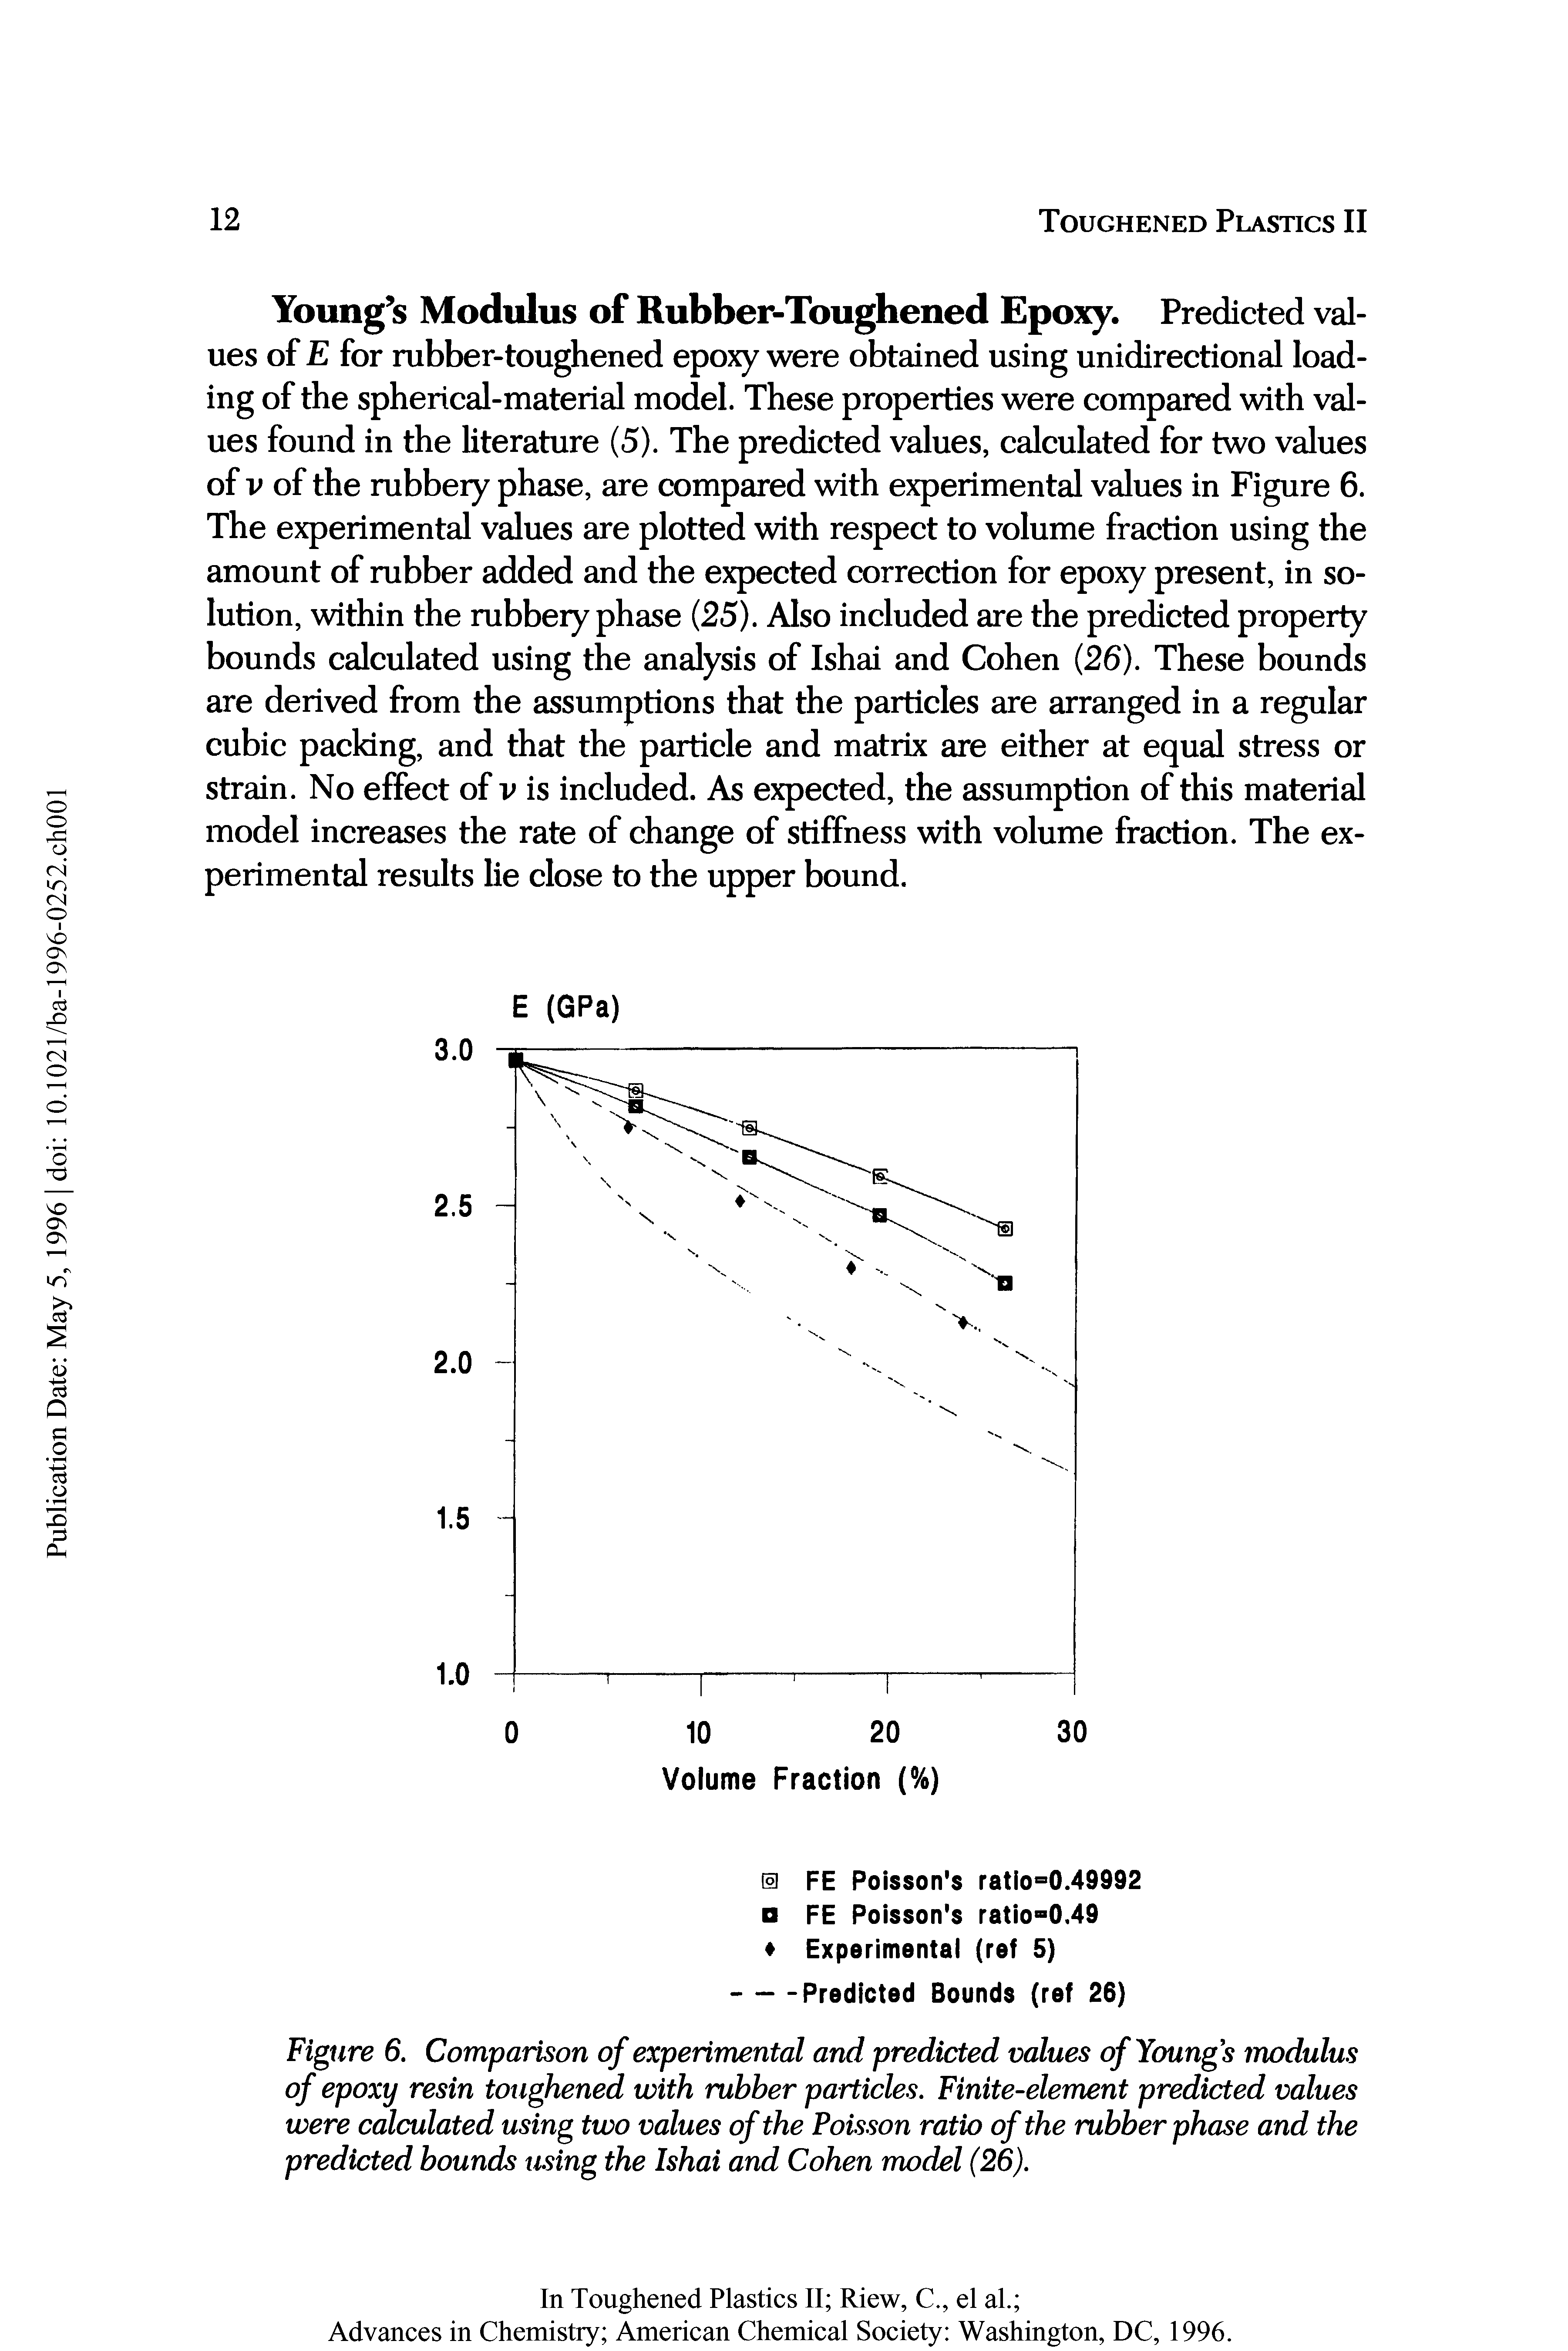 Figure 6. Comparison of experimental and predicted values of Youngs modulus of epoxy resin toughened with rubber particles. Finite-element predicted values were calculated using two values of the Poisson ratio of the rubber phase and the predicted bounds using the Ishai and Cohen model (26).